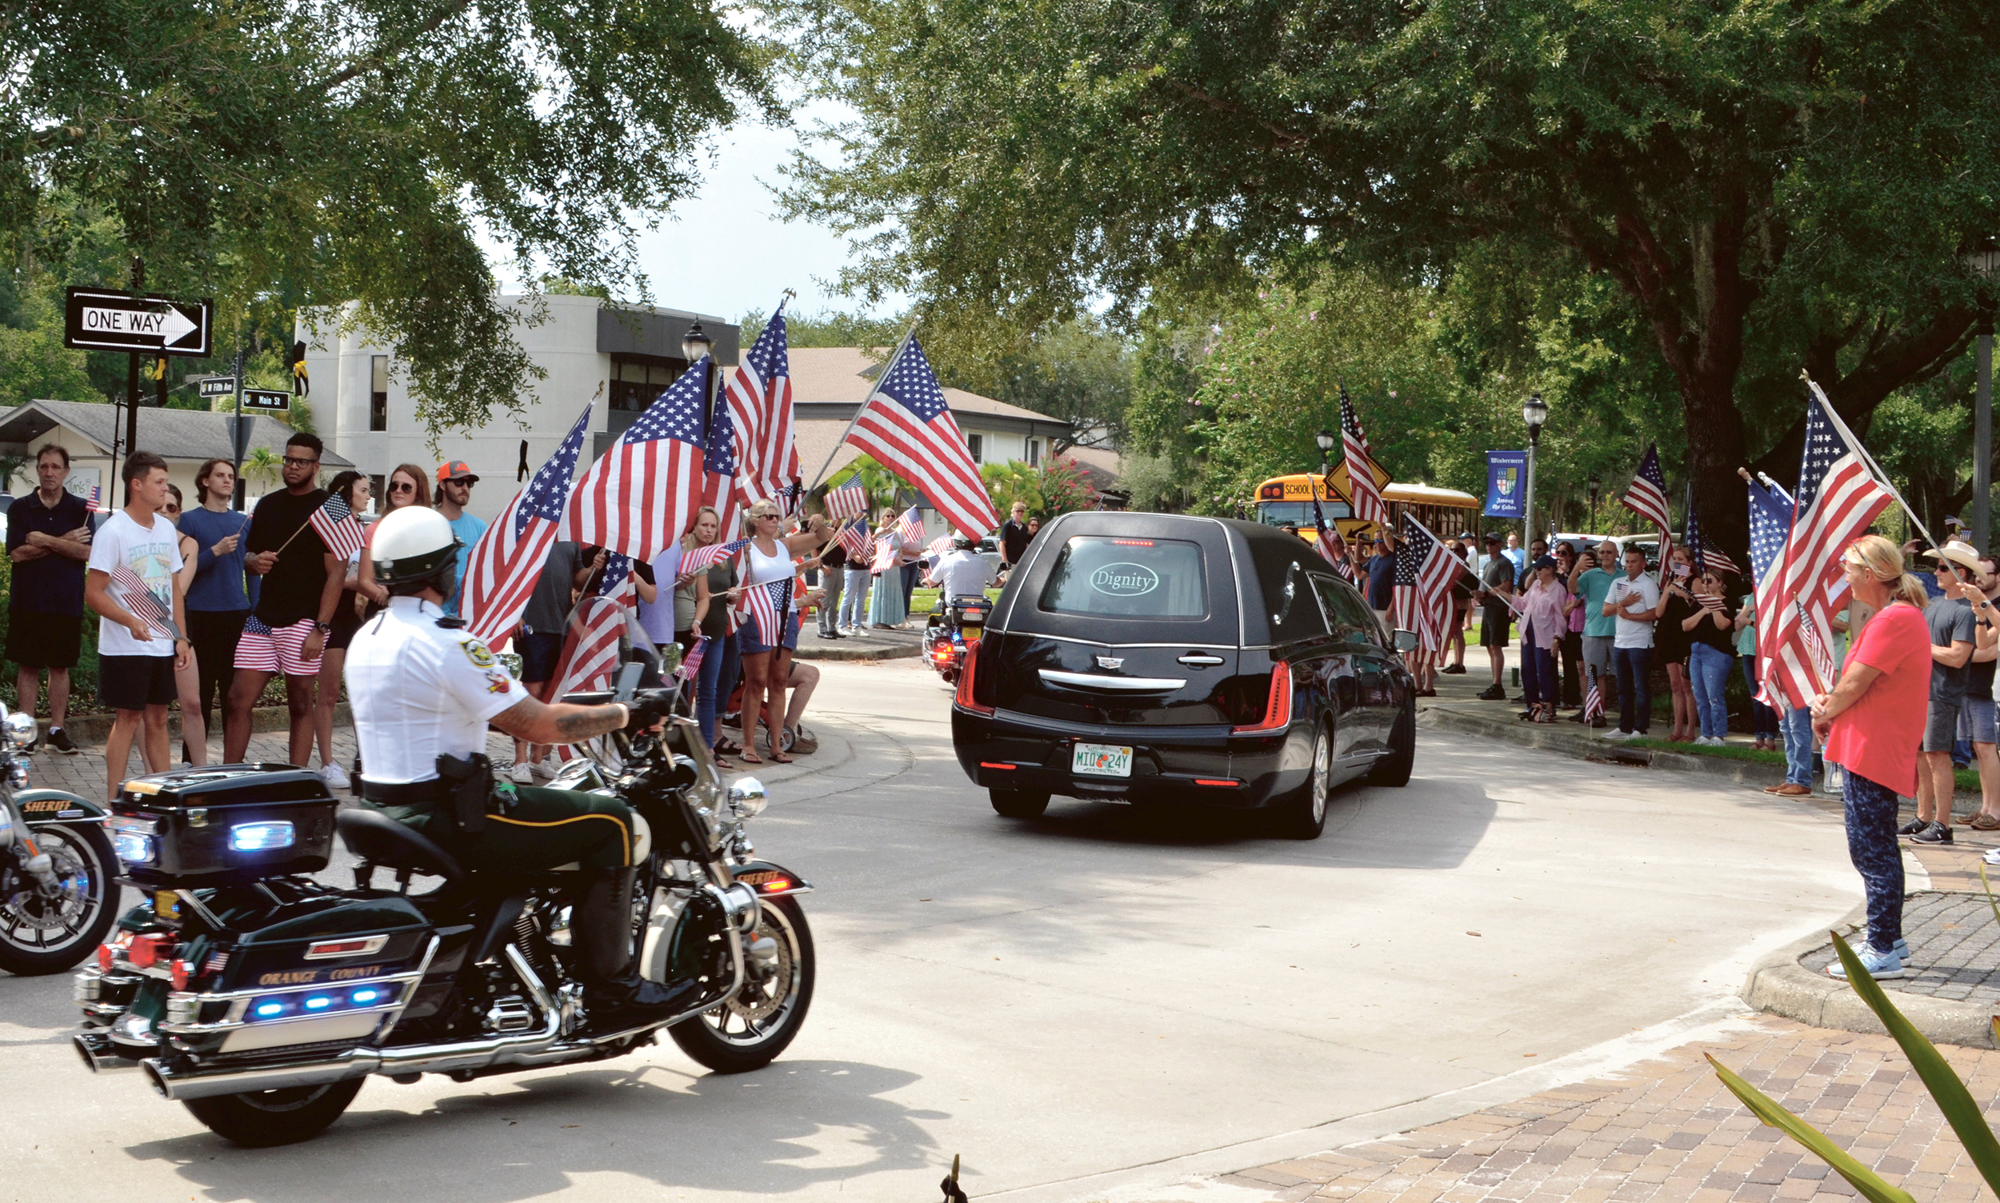 Police officers escorted the Fitzgibbon family through downtown Windermere, while friends and residents honored them with a sea of American flags.